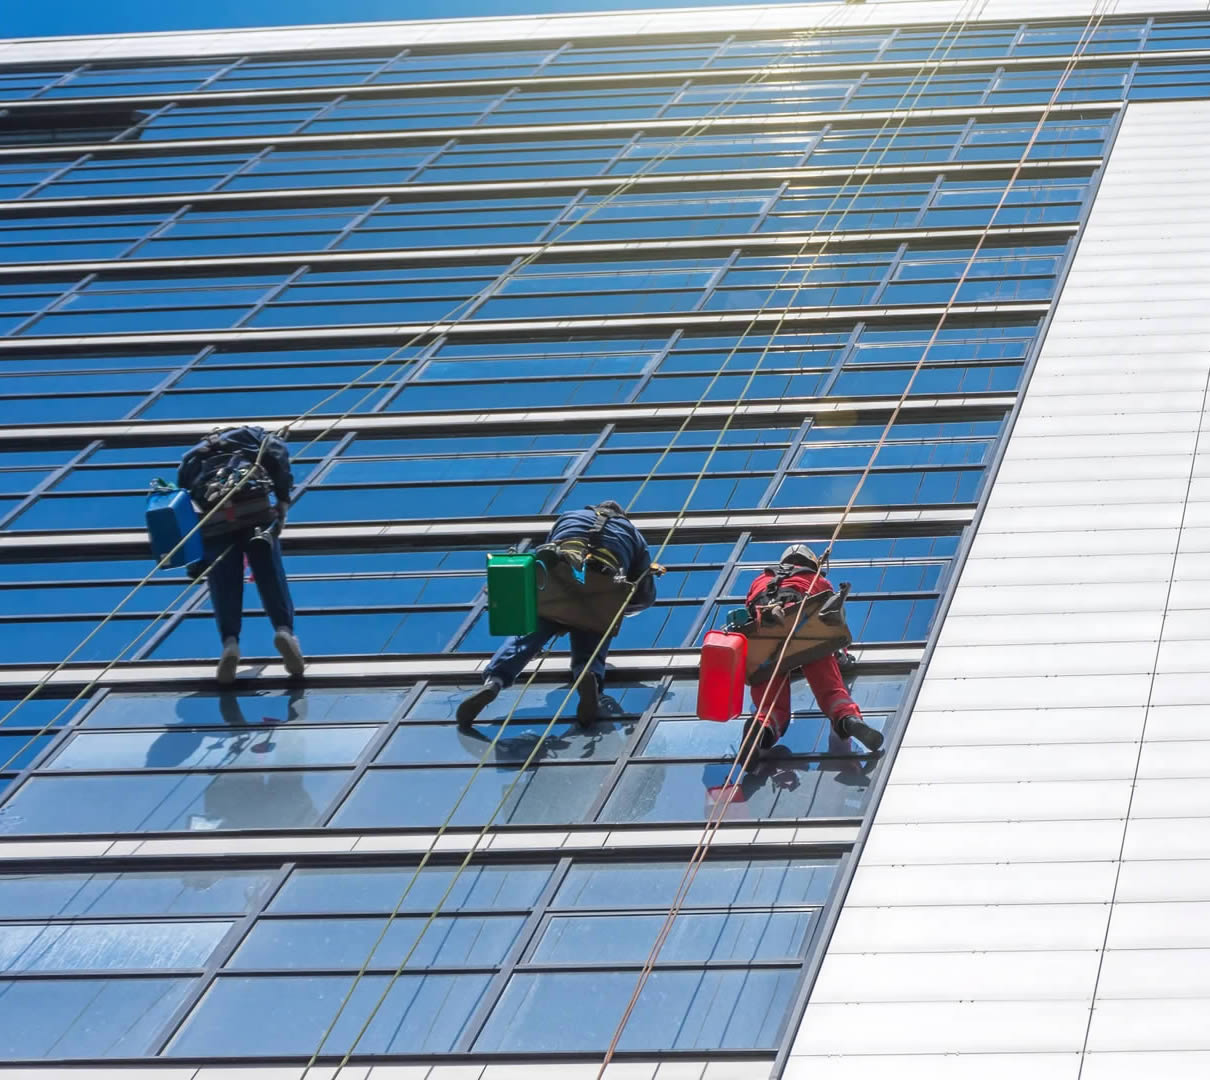 Strata buildings require very different services and cleaning solutions